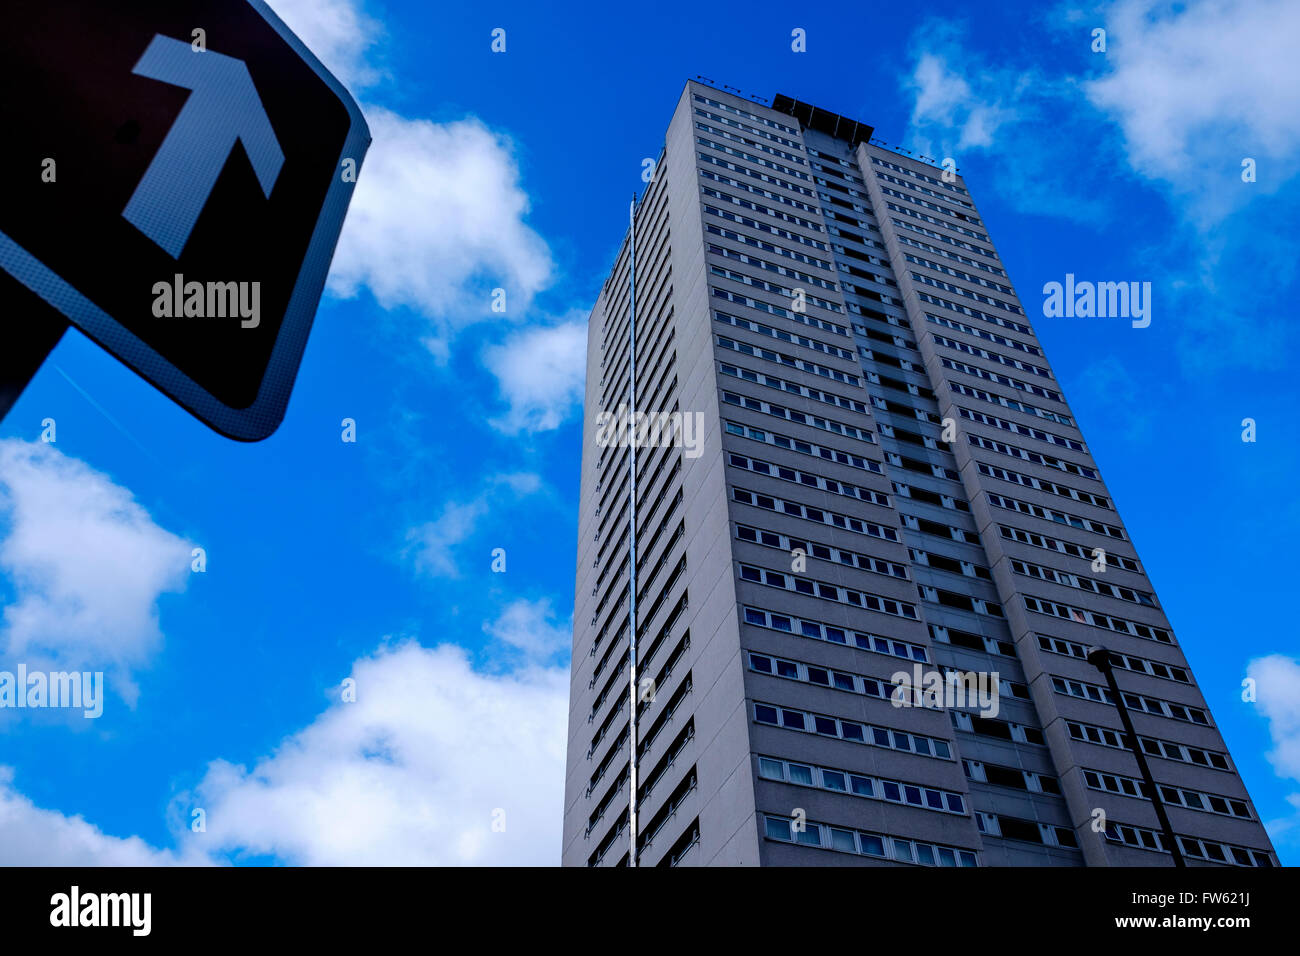 High rise flats in the centre of Birmingham, England UK Stock Photo